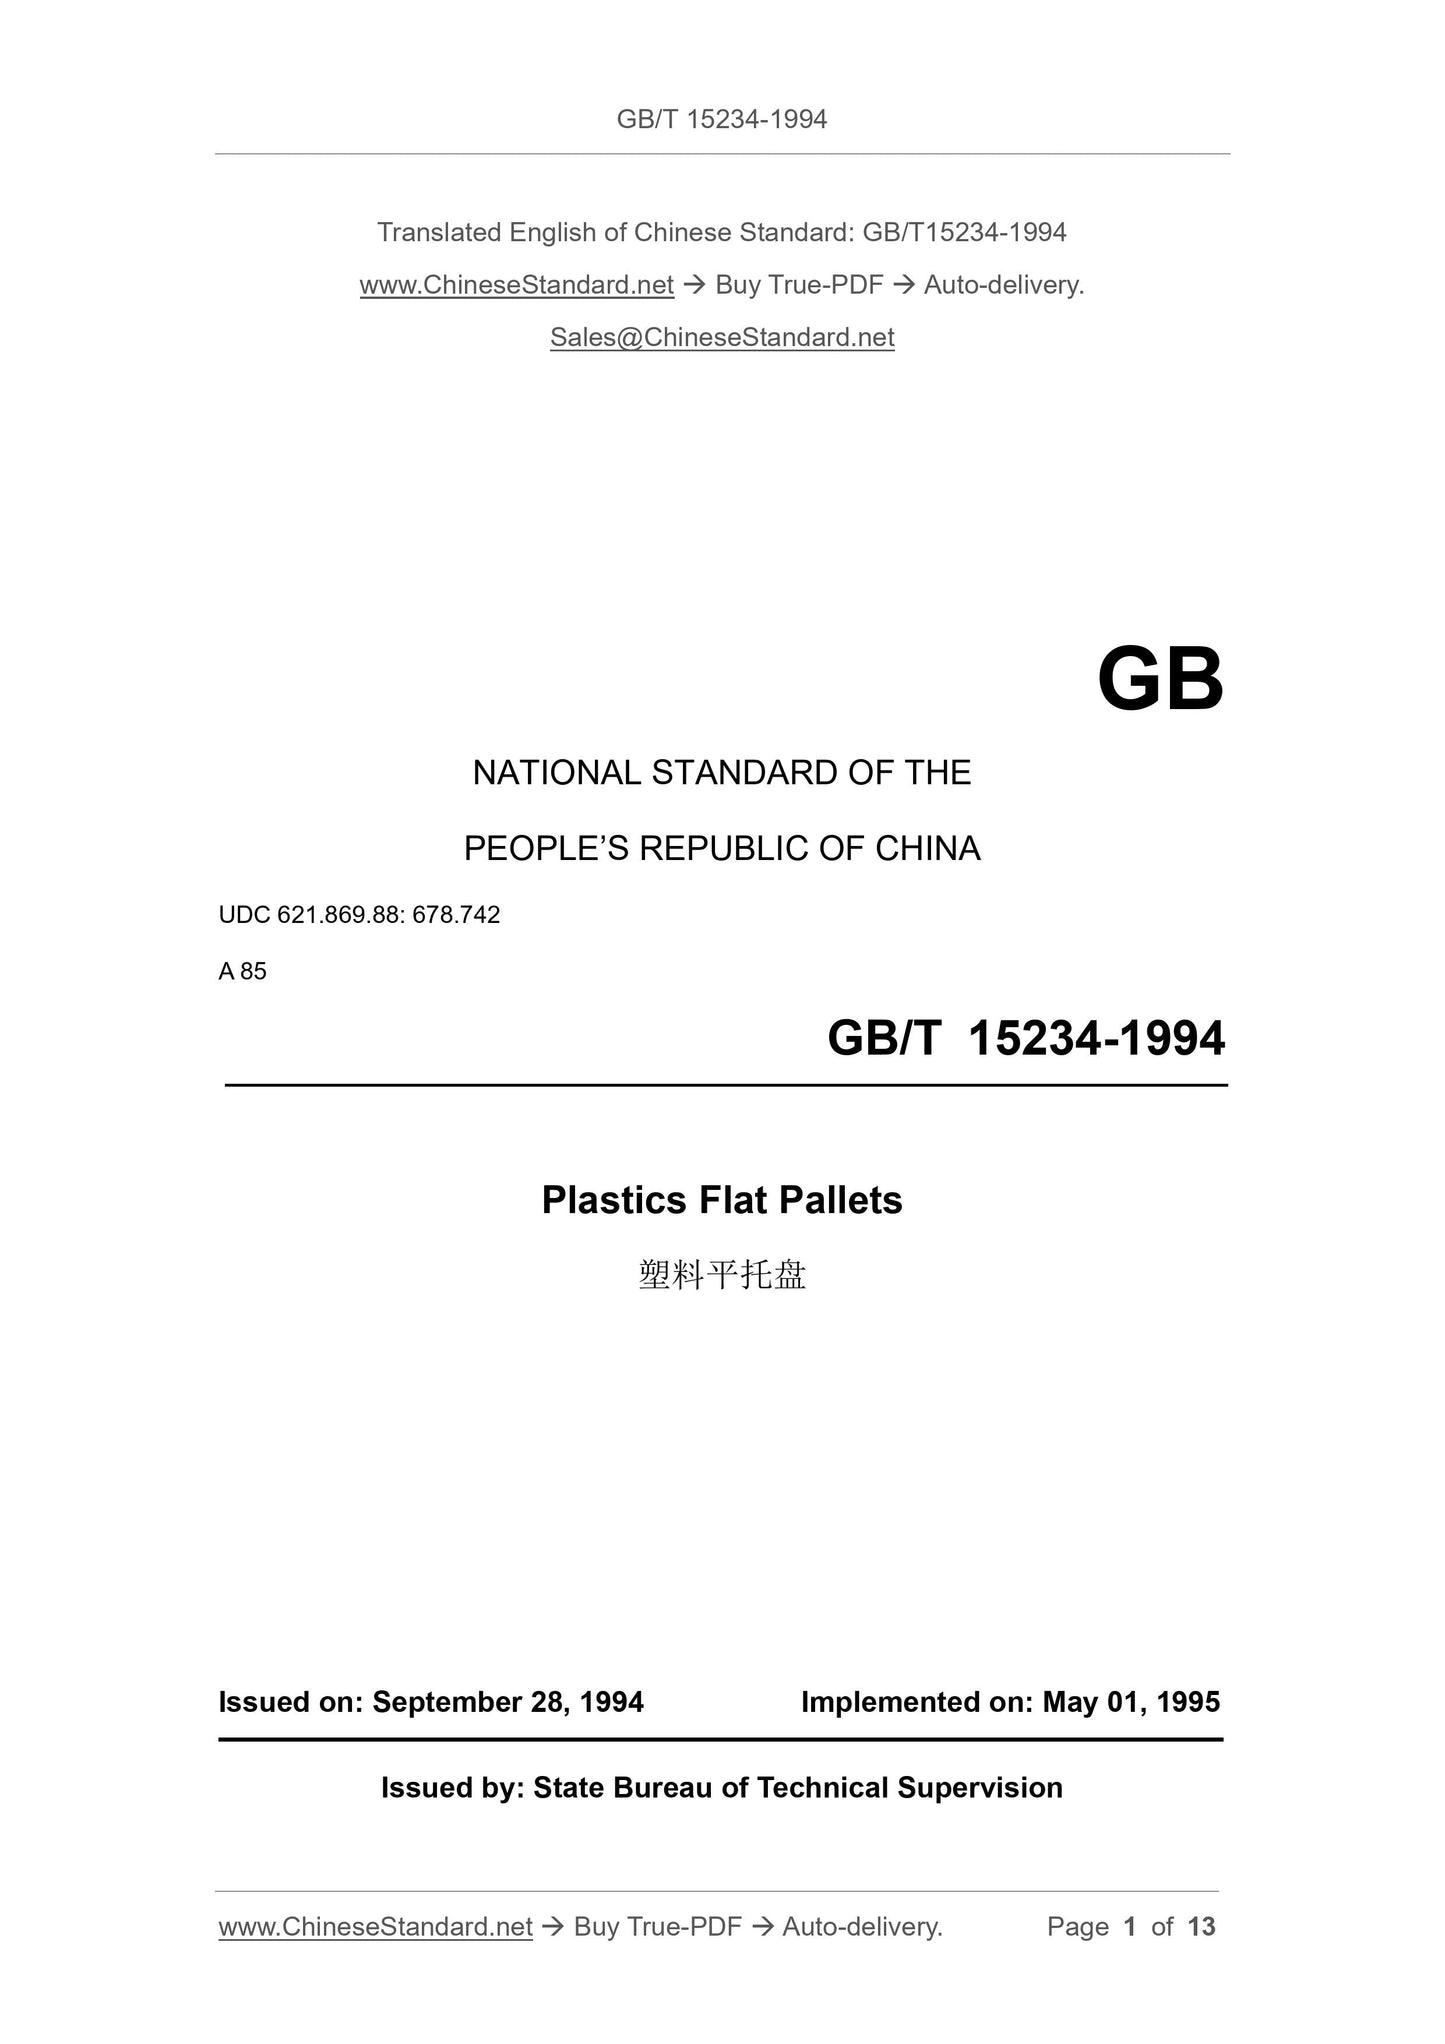 GB/T 15234-1994 Page 1